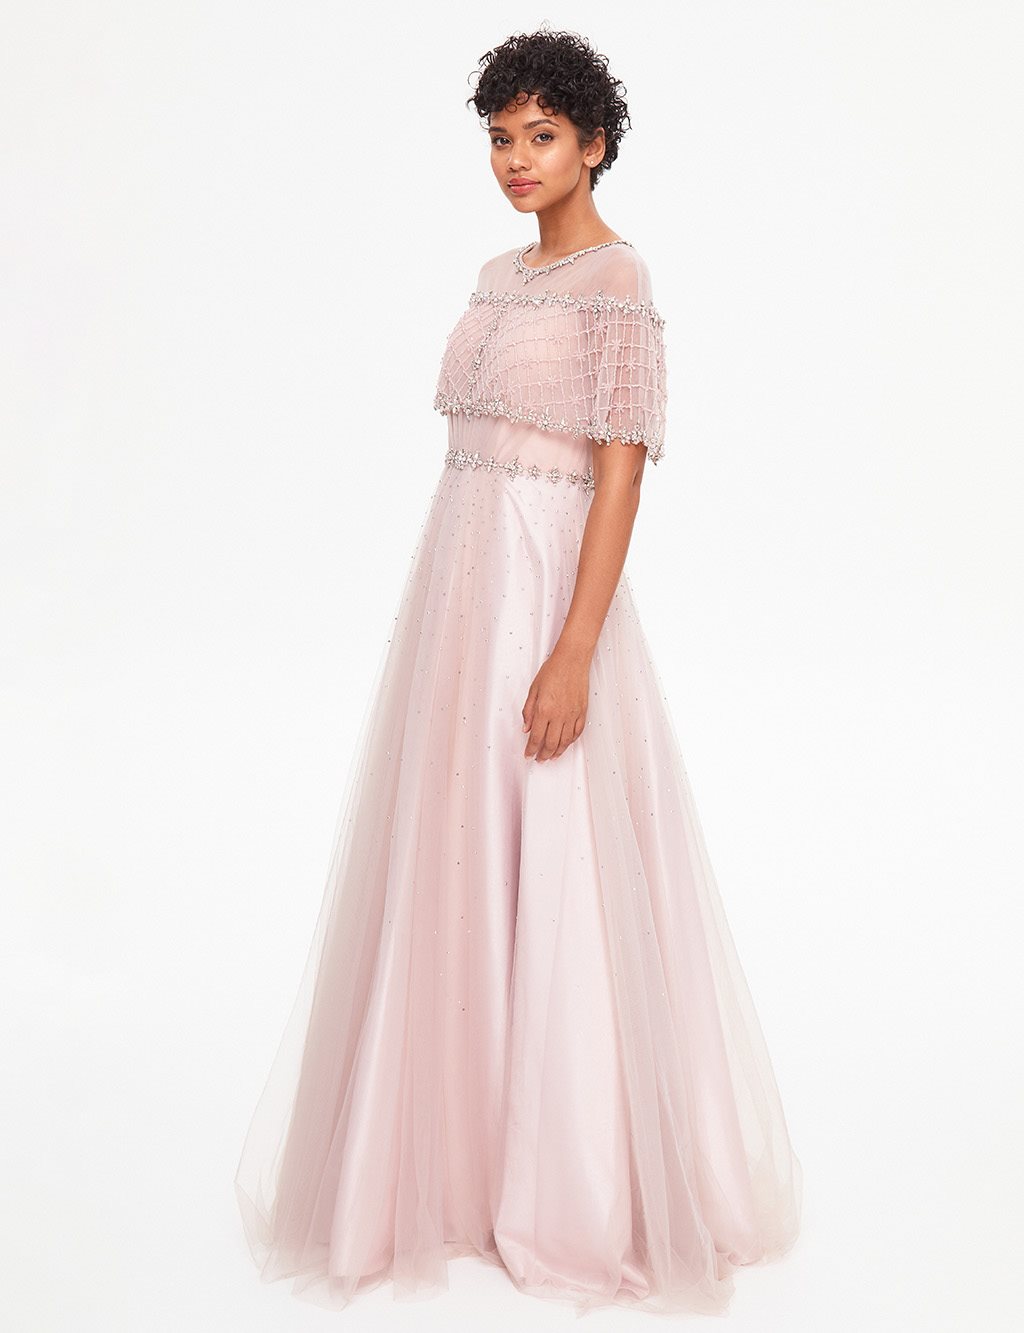 TIARA Tulle Covered Evening Dress Lilac